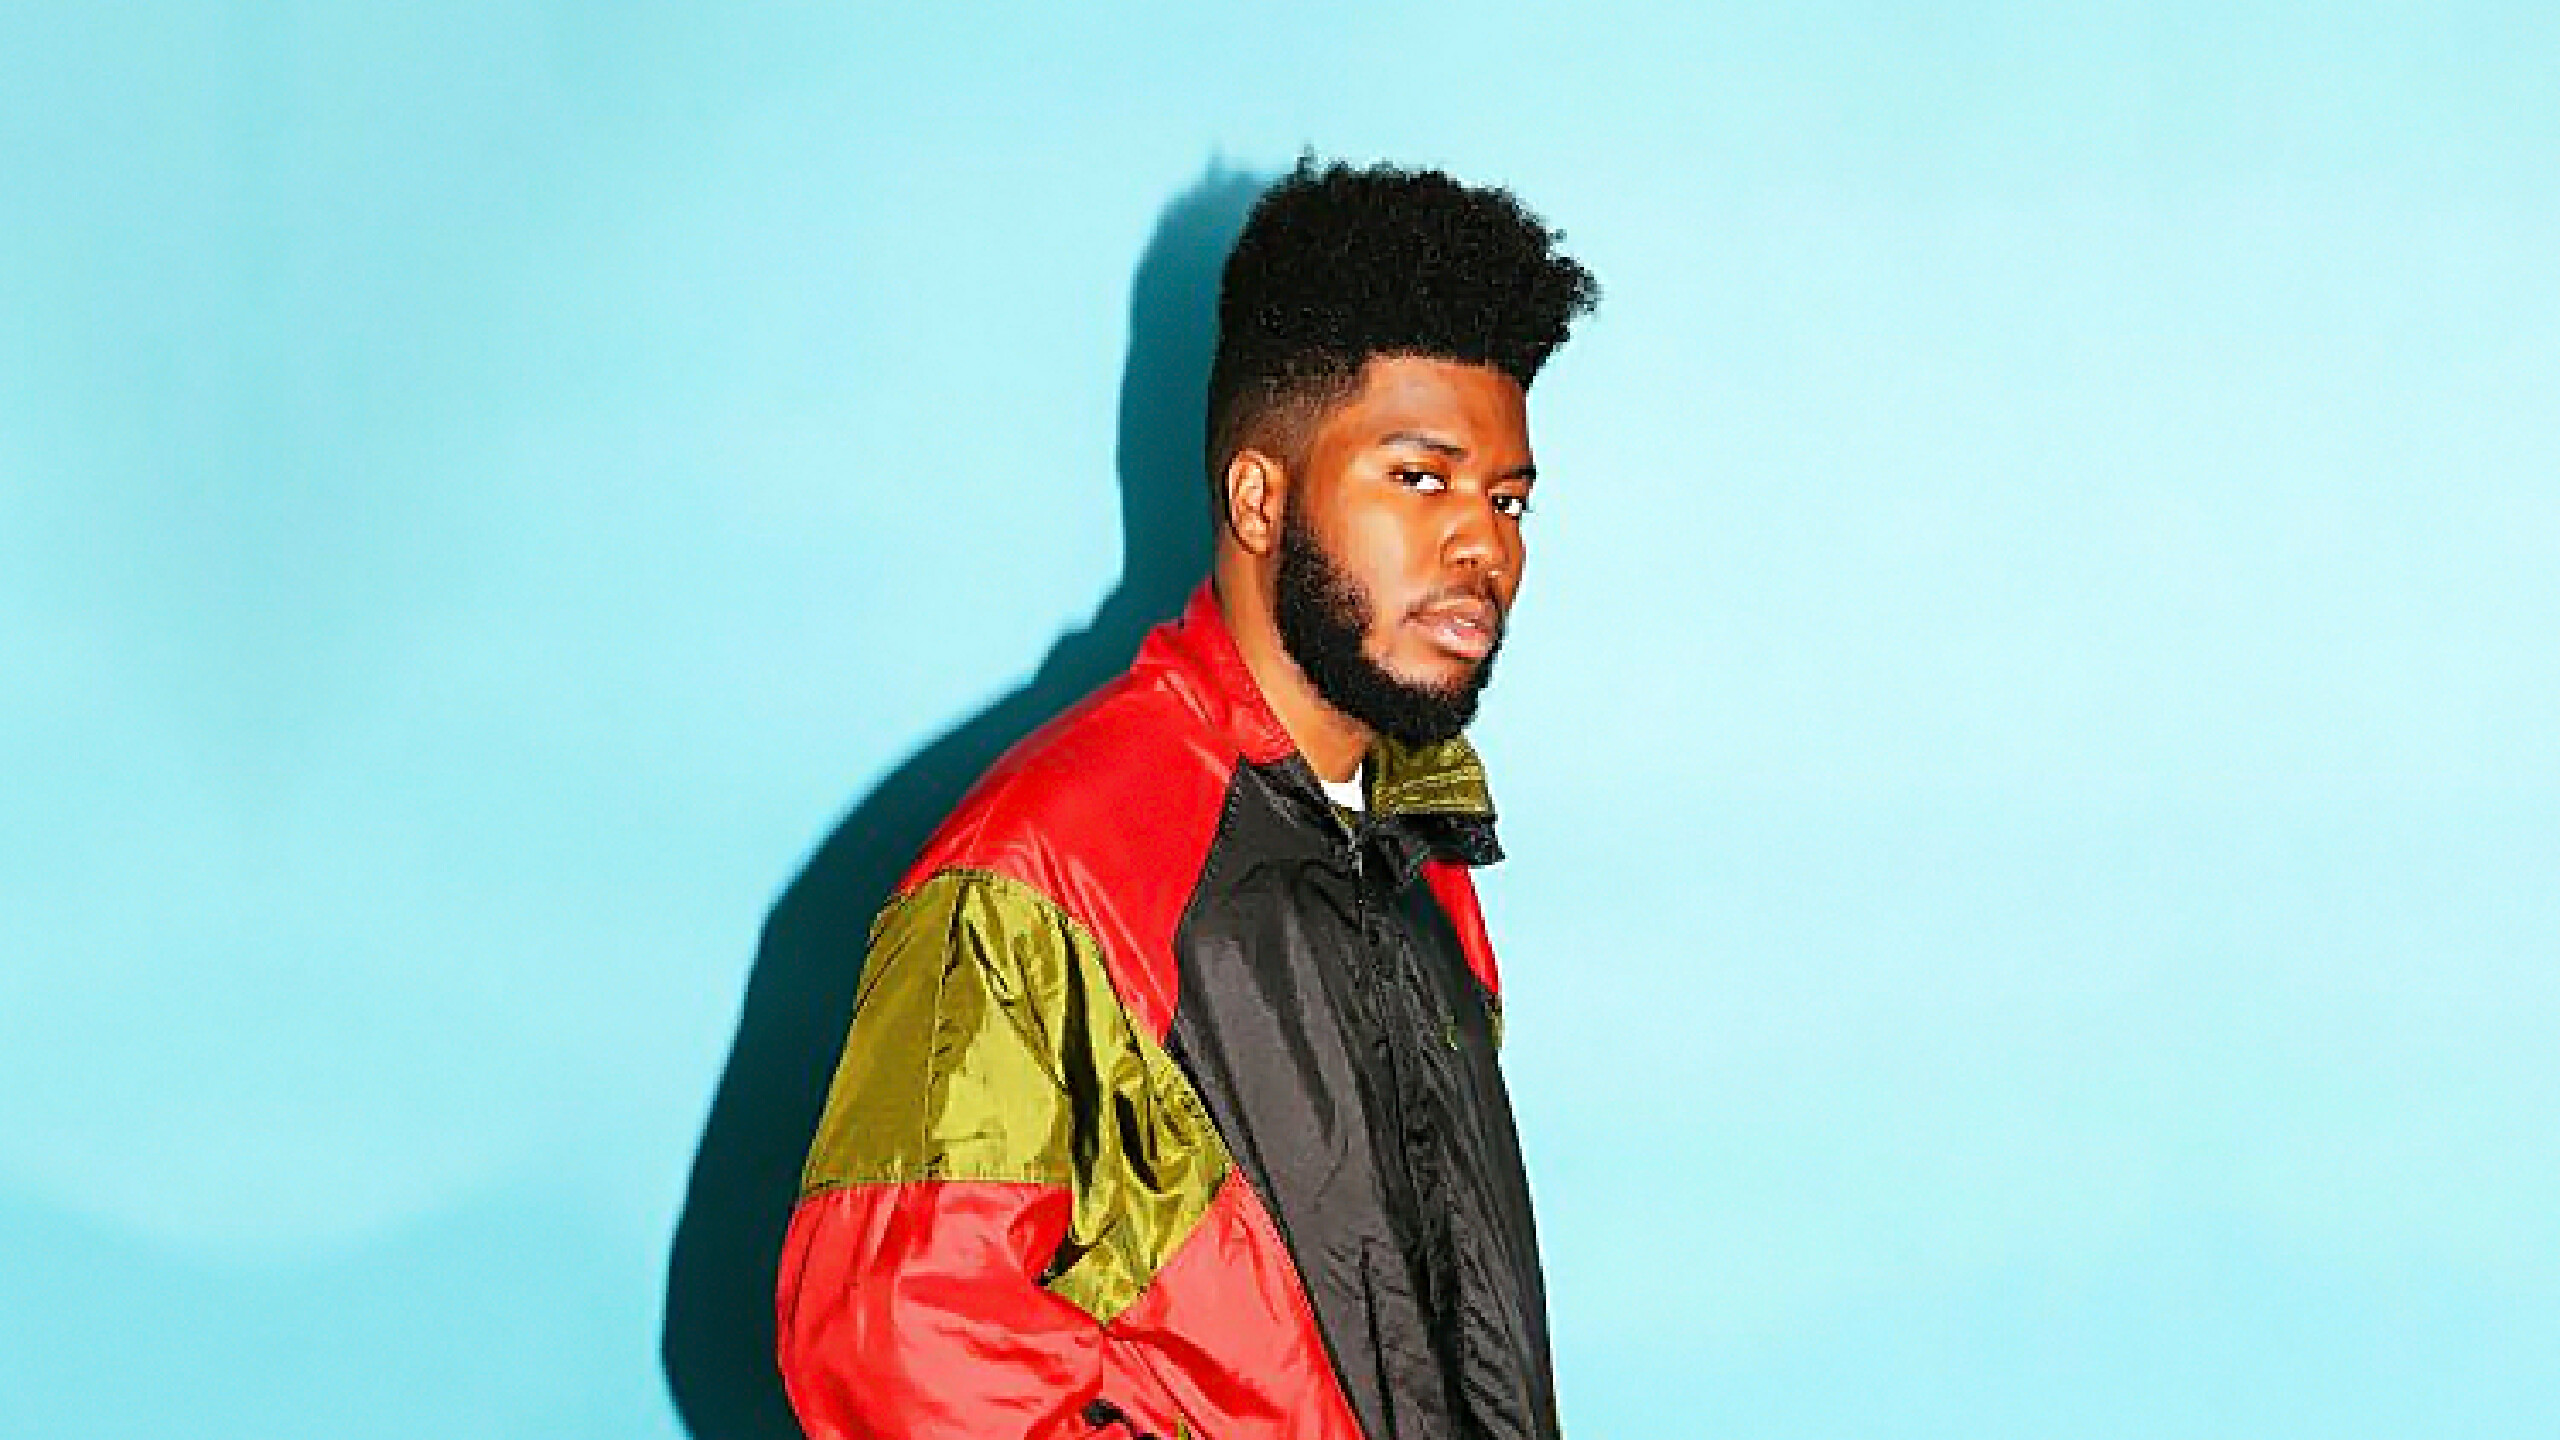 Khalid (Singer): Made his television debut performing "Location" on The Tonight Show Starring Jimmy Fallon on March 15, 2017. 2560x1440 HD Background.